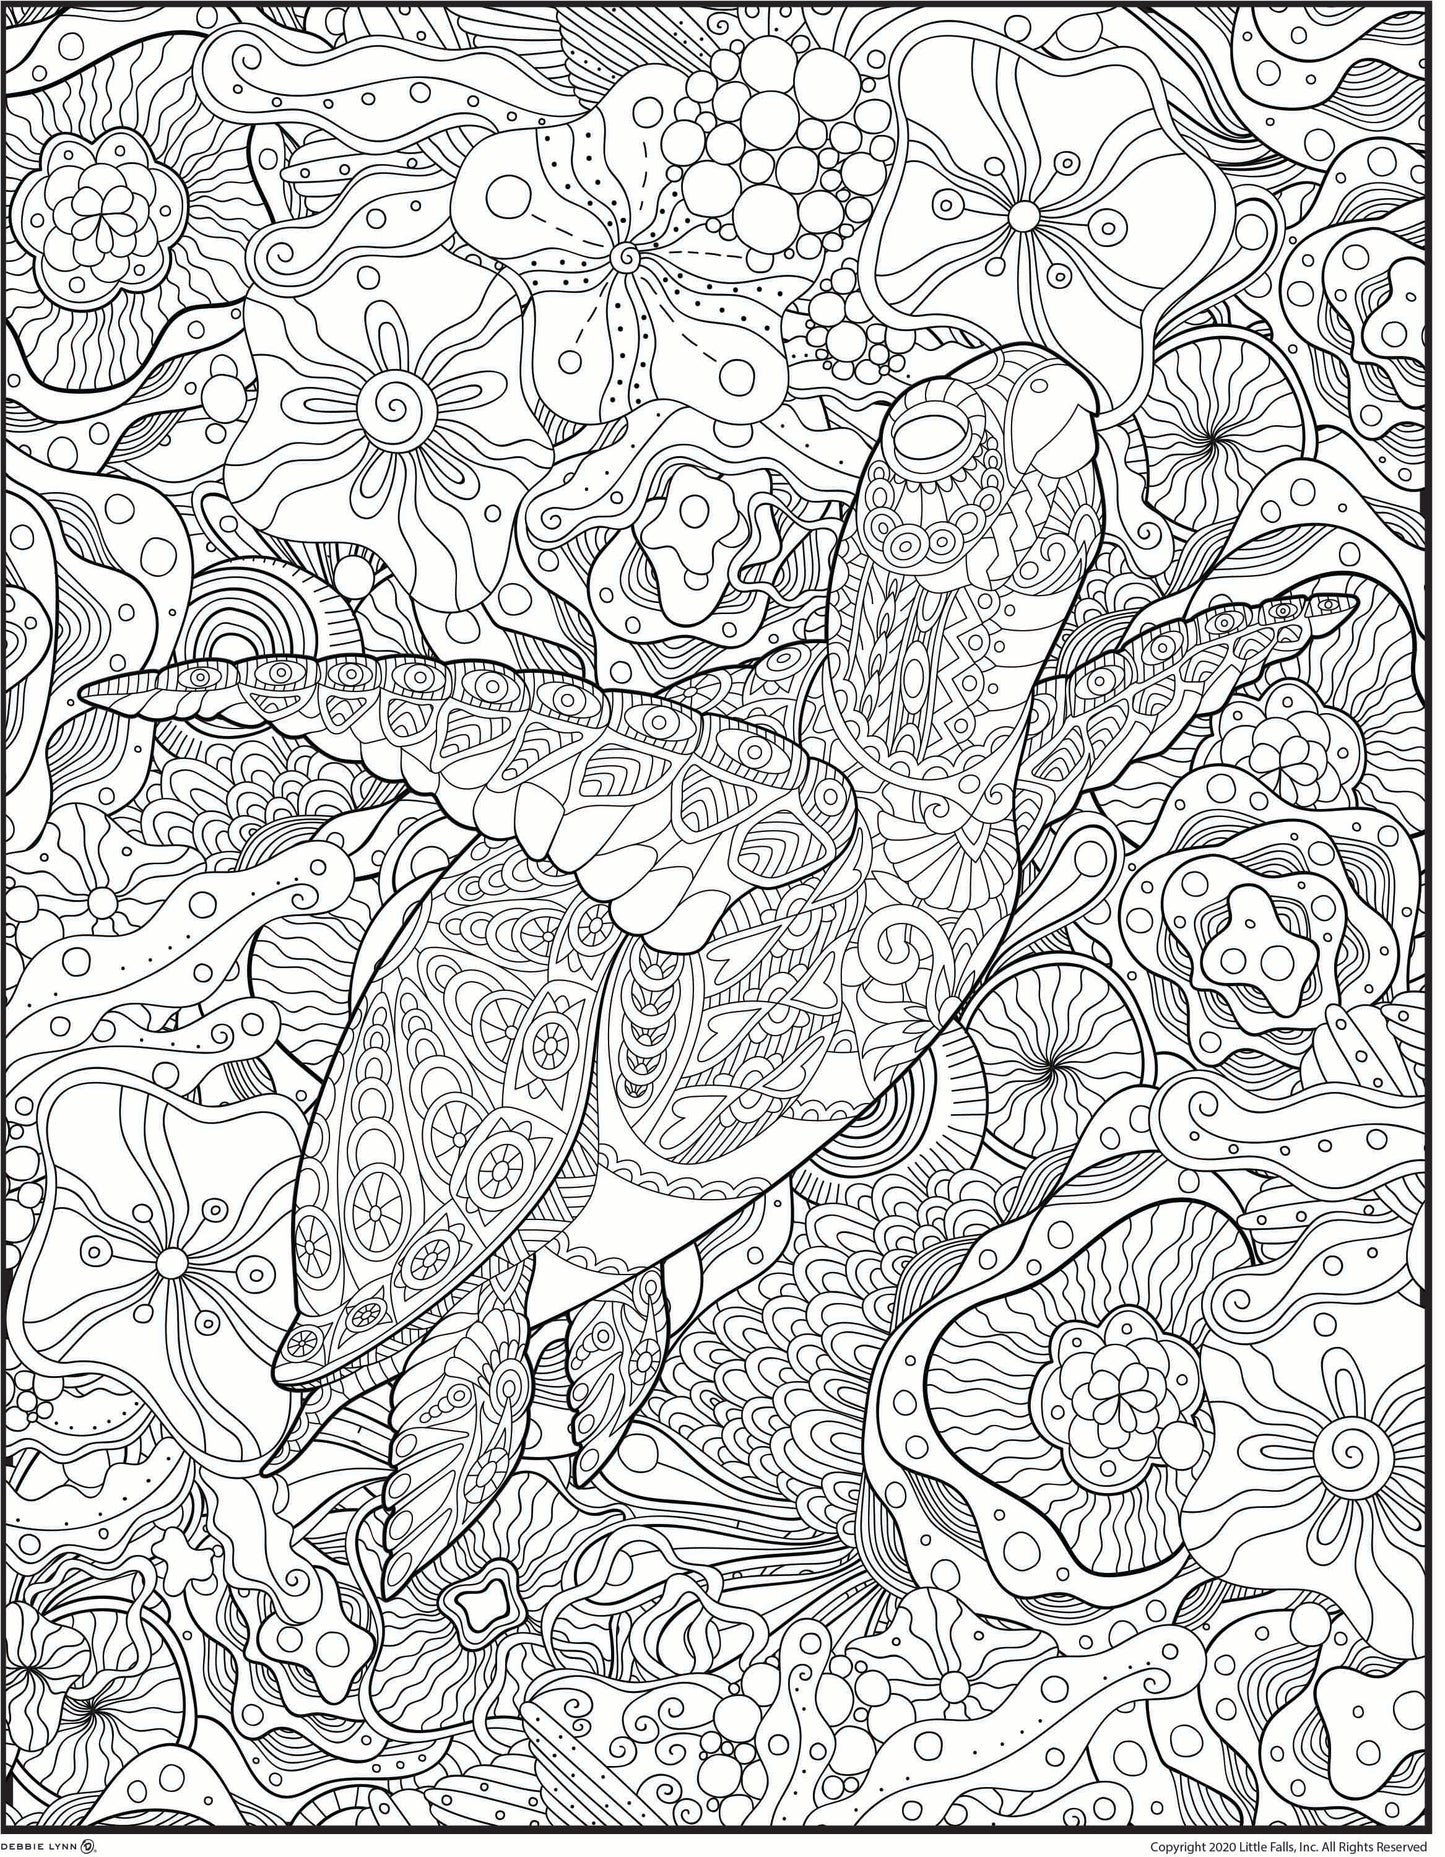 Turtle Personalized Giant Coloring Poster 46"x60"